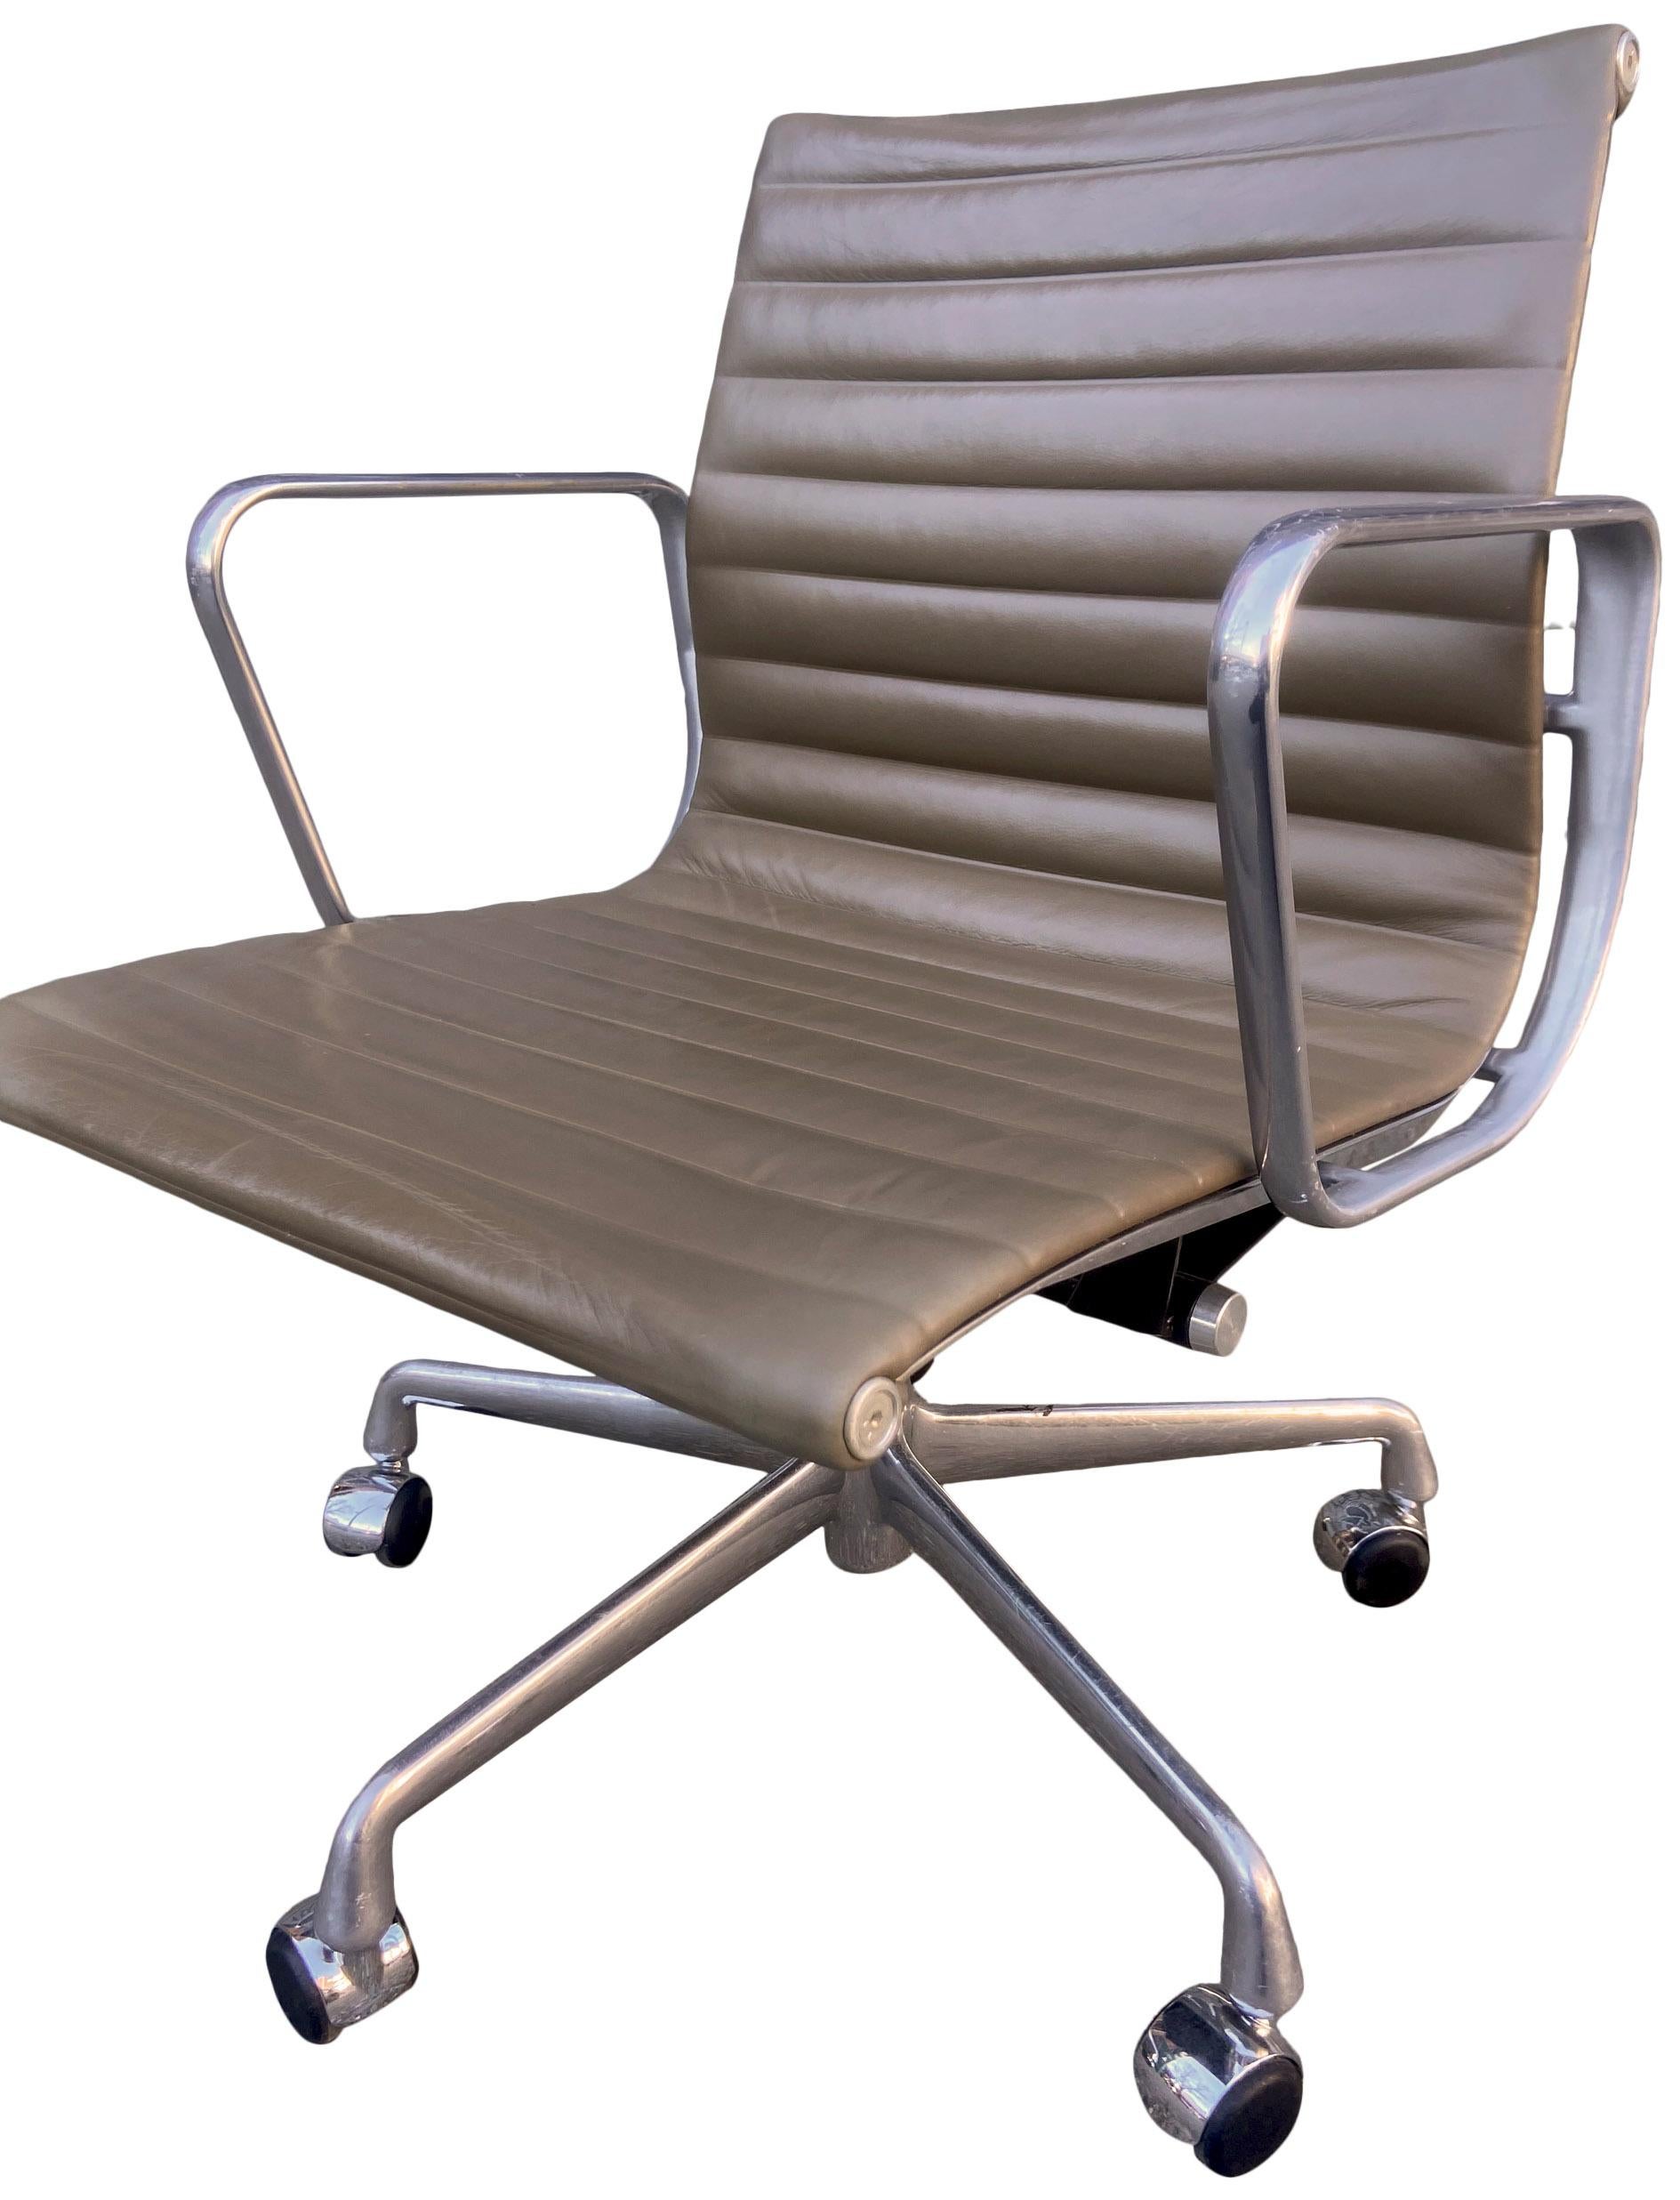 Midcentury Eames Aluminum Group Chairs in Tan / Brown Leather 2